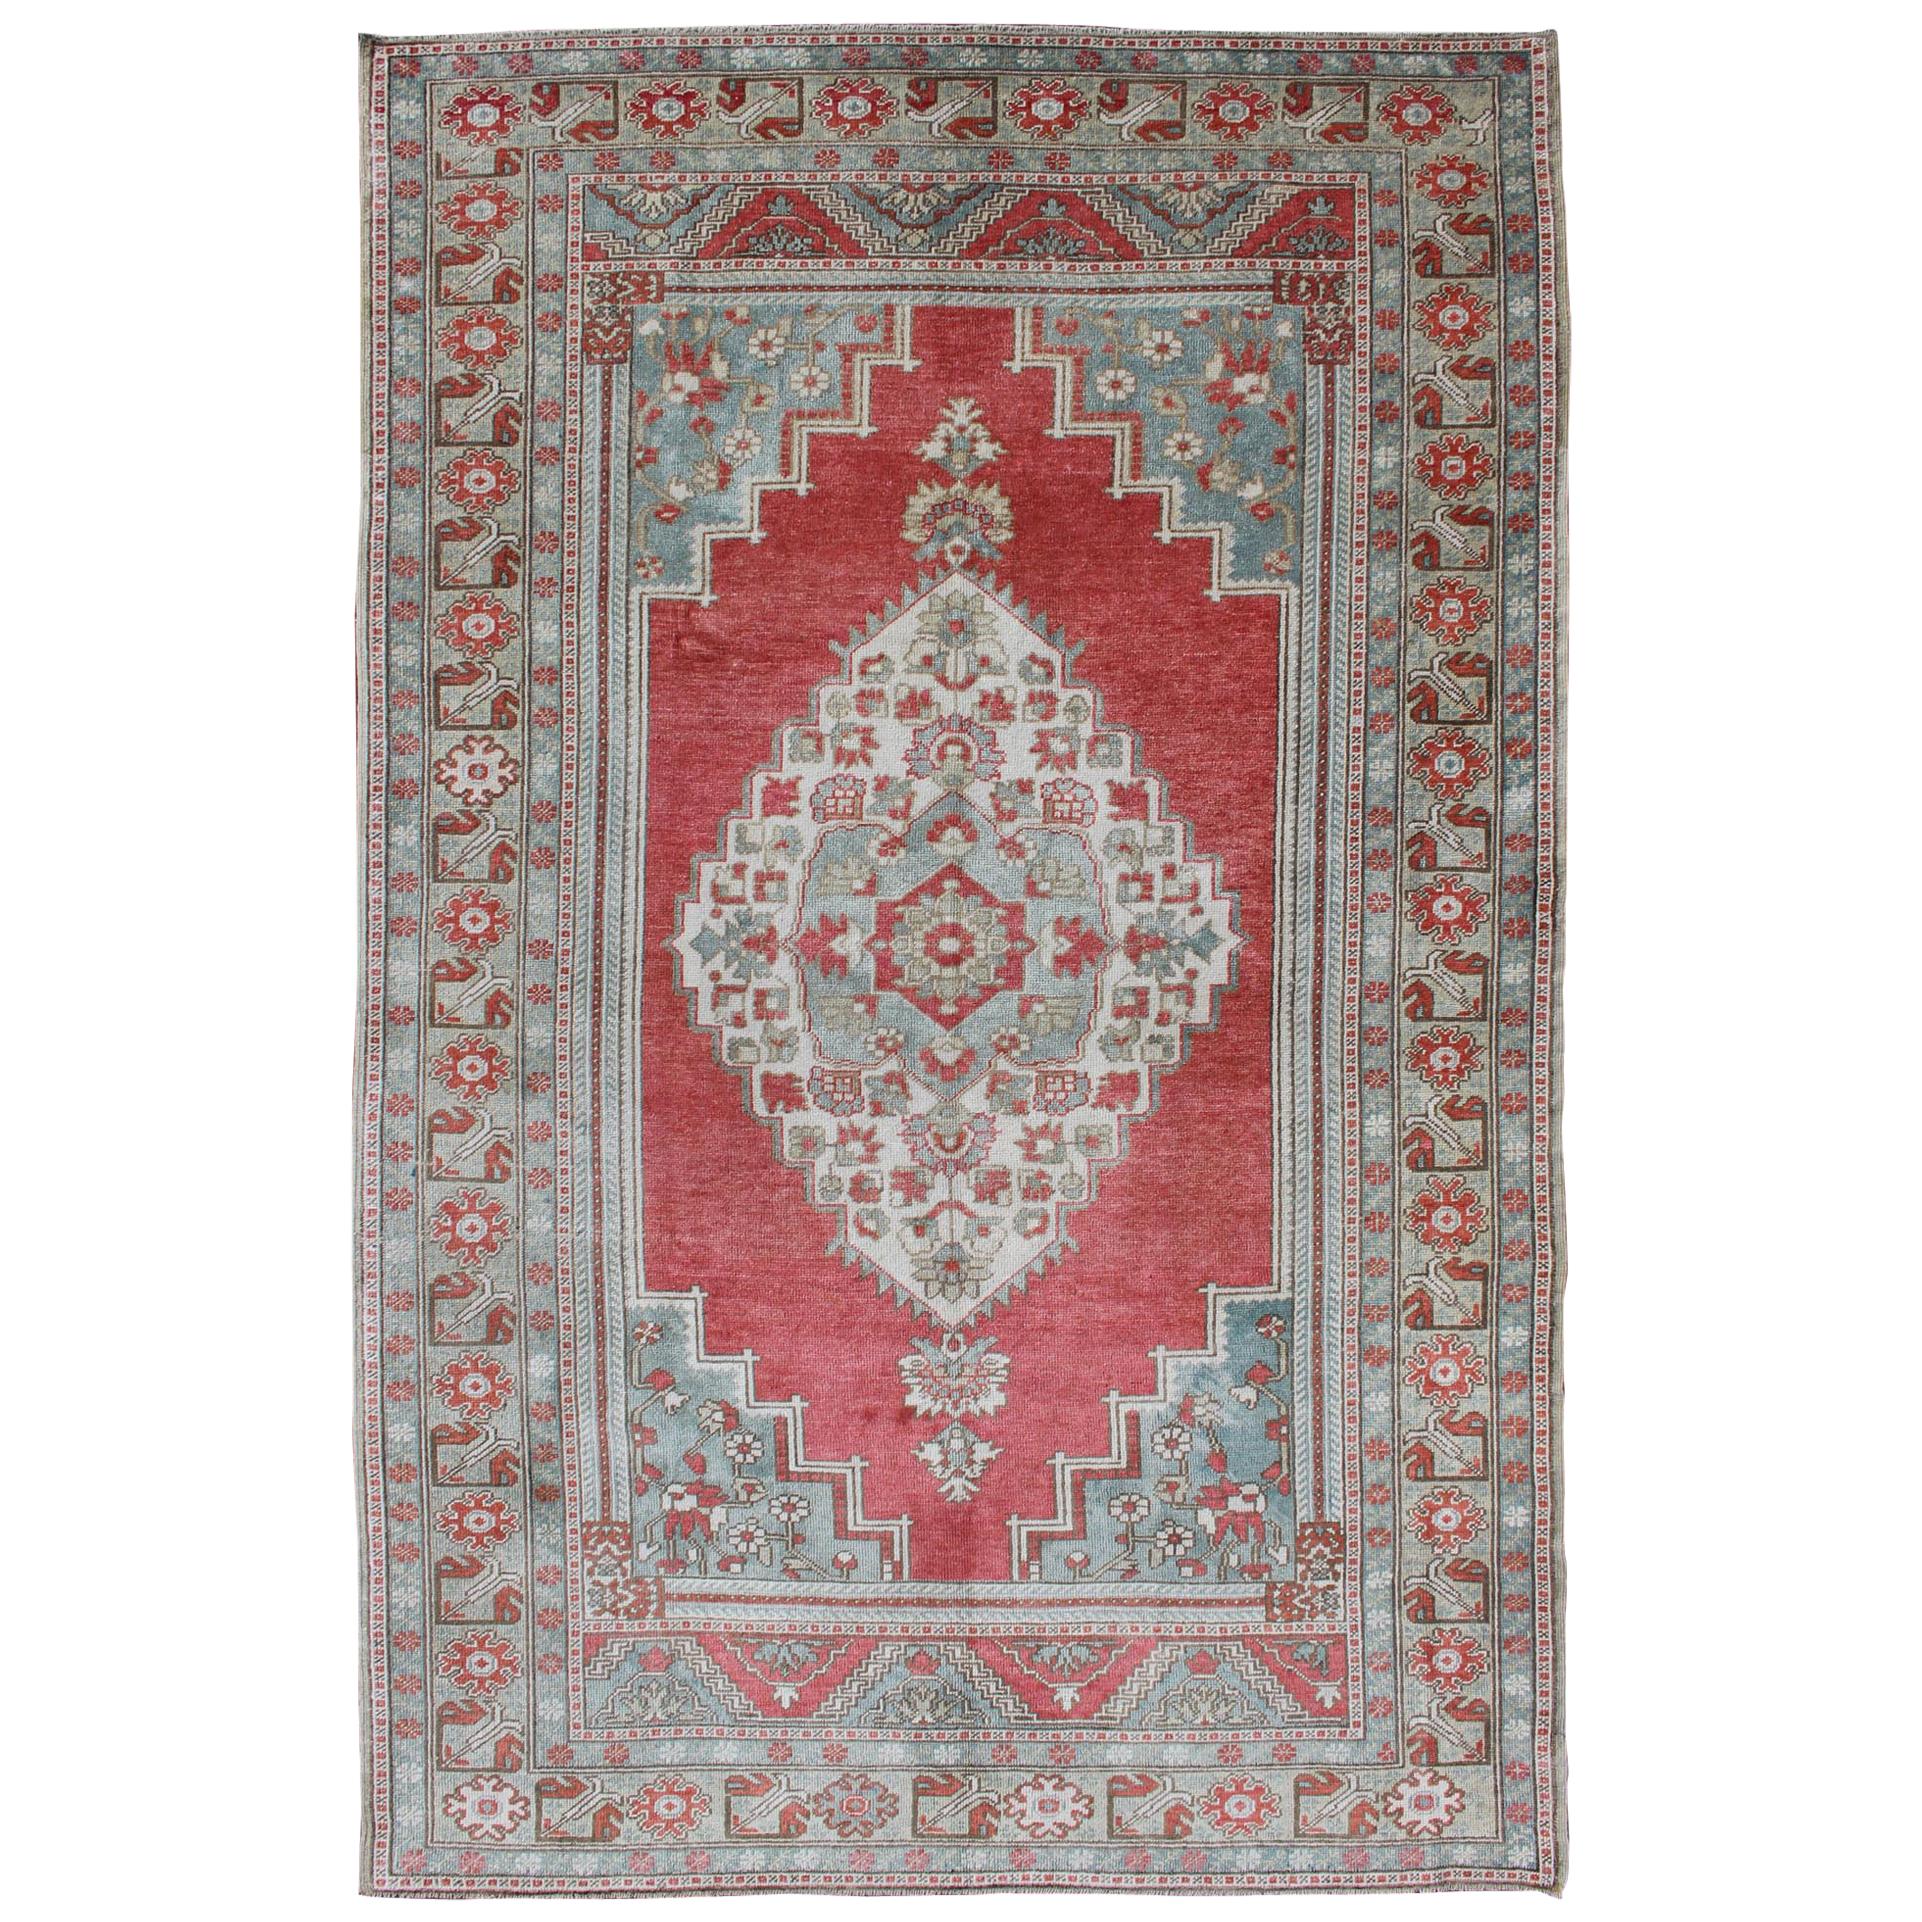 Vintage Turkish Oushak Rug with Medallion Design in Pink Red and Gray Blue